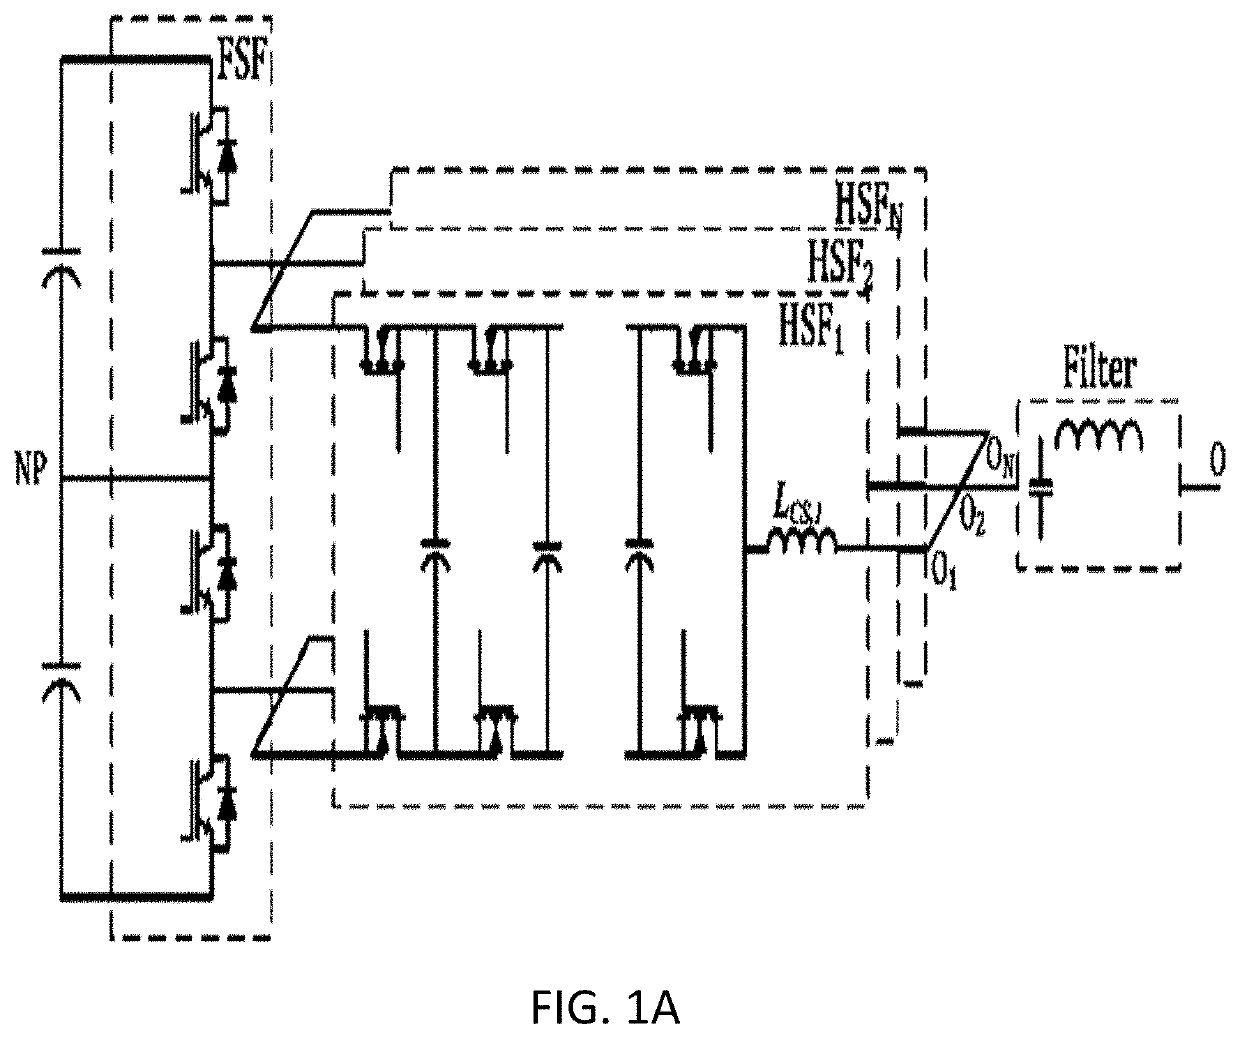 Internal paralleled active neutral point clamped converter with logic-based flying capacitor voltage balancing